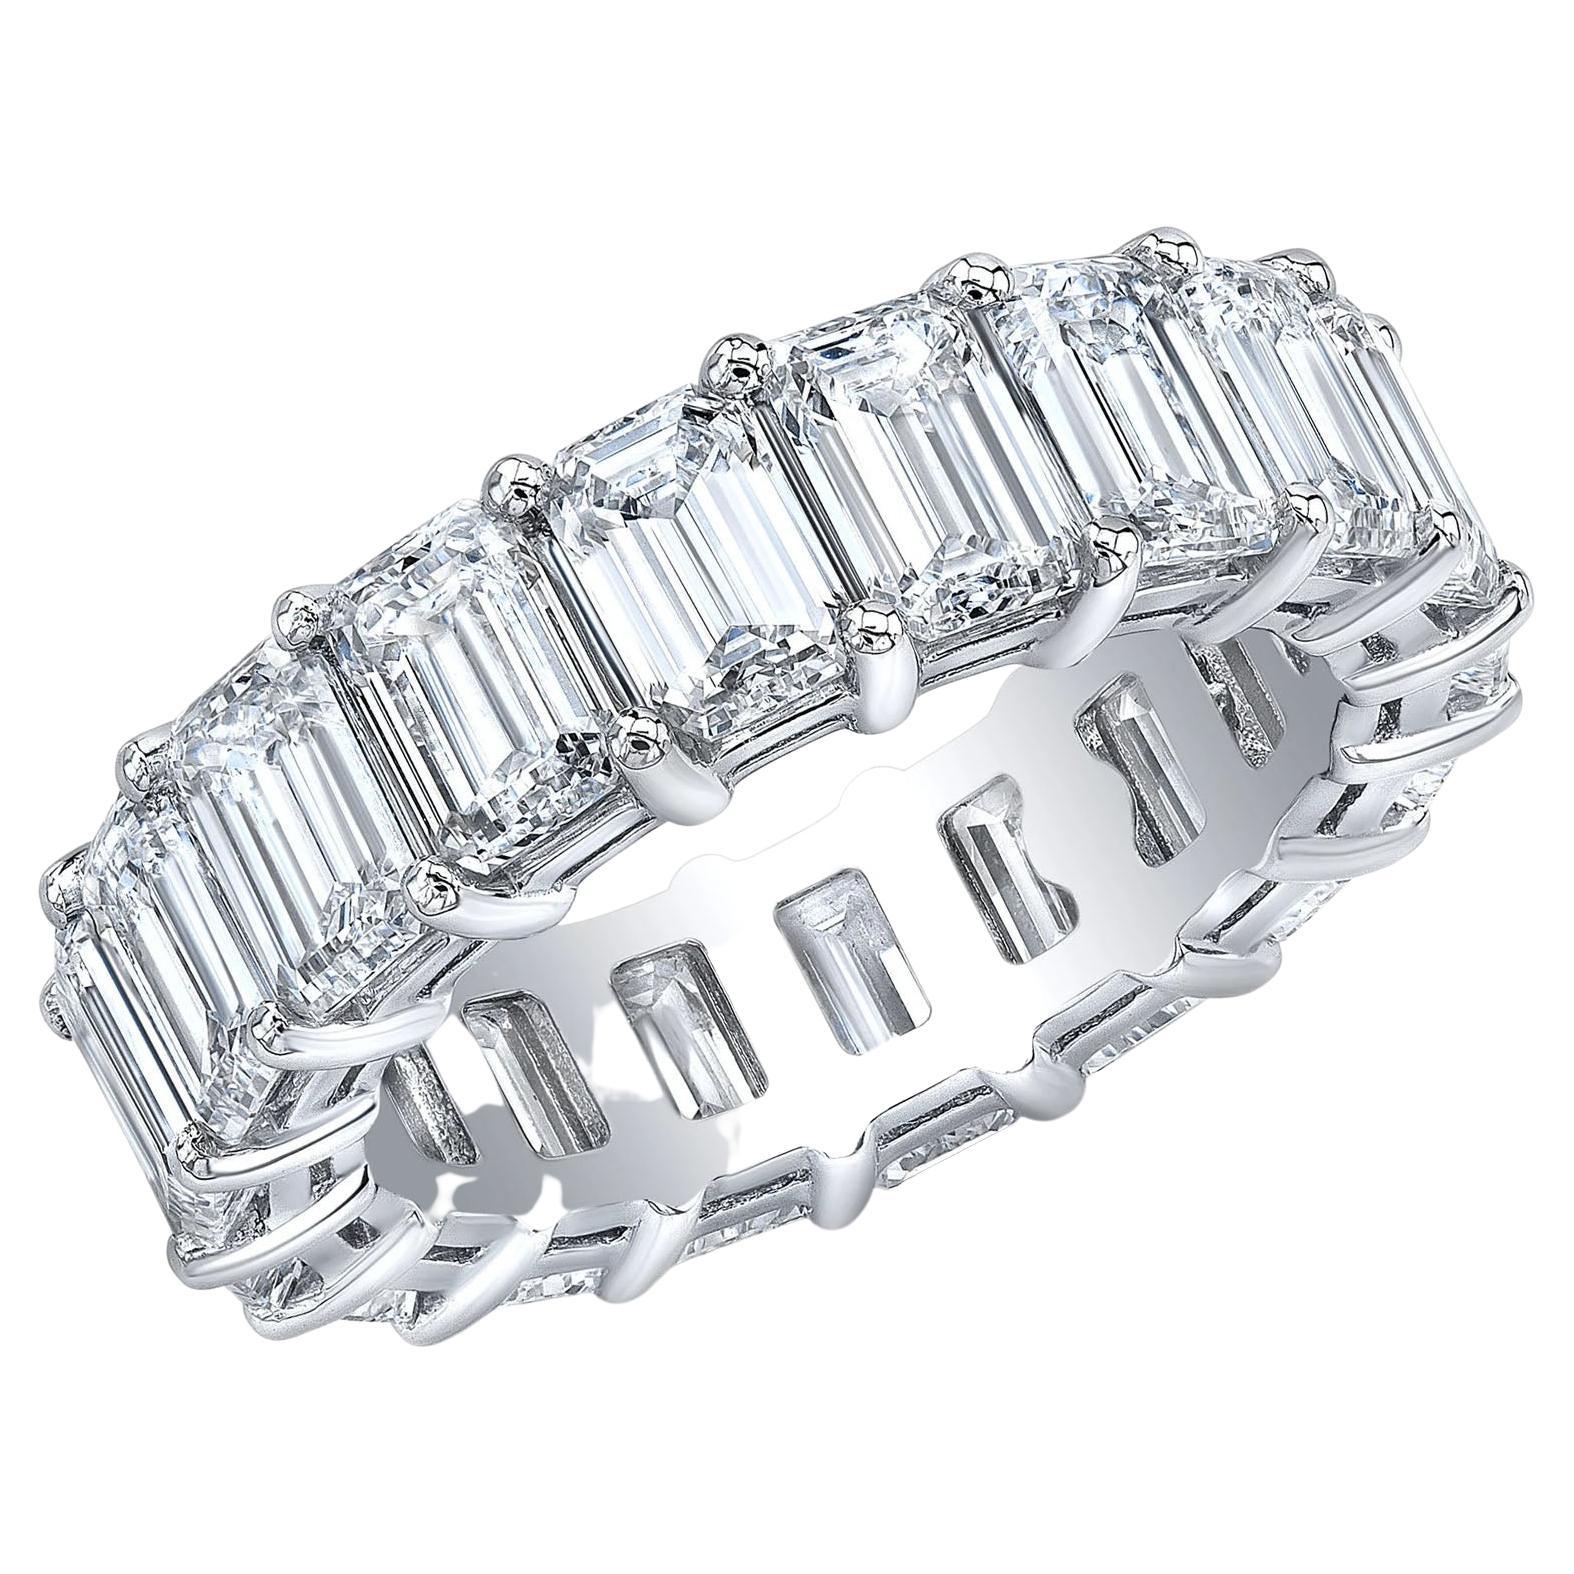 For Sale:  8.00 Ct Emerald Cut Natural Diamond Eternity Band G Color VS1 Clarity Platinum